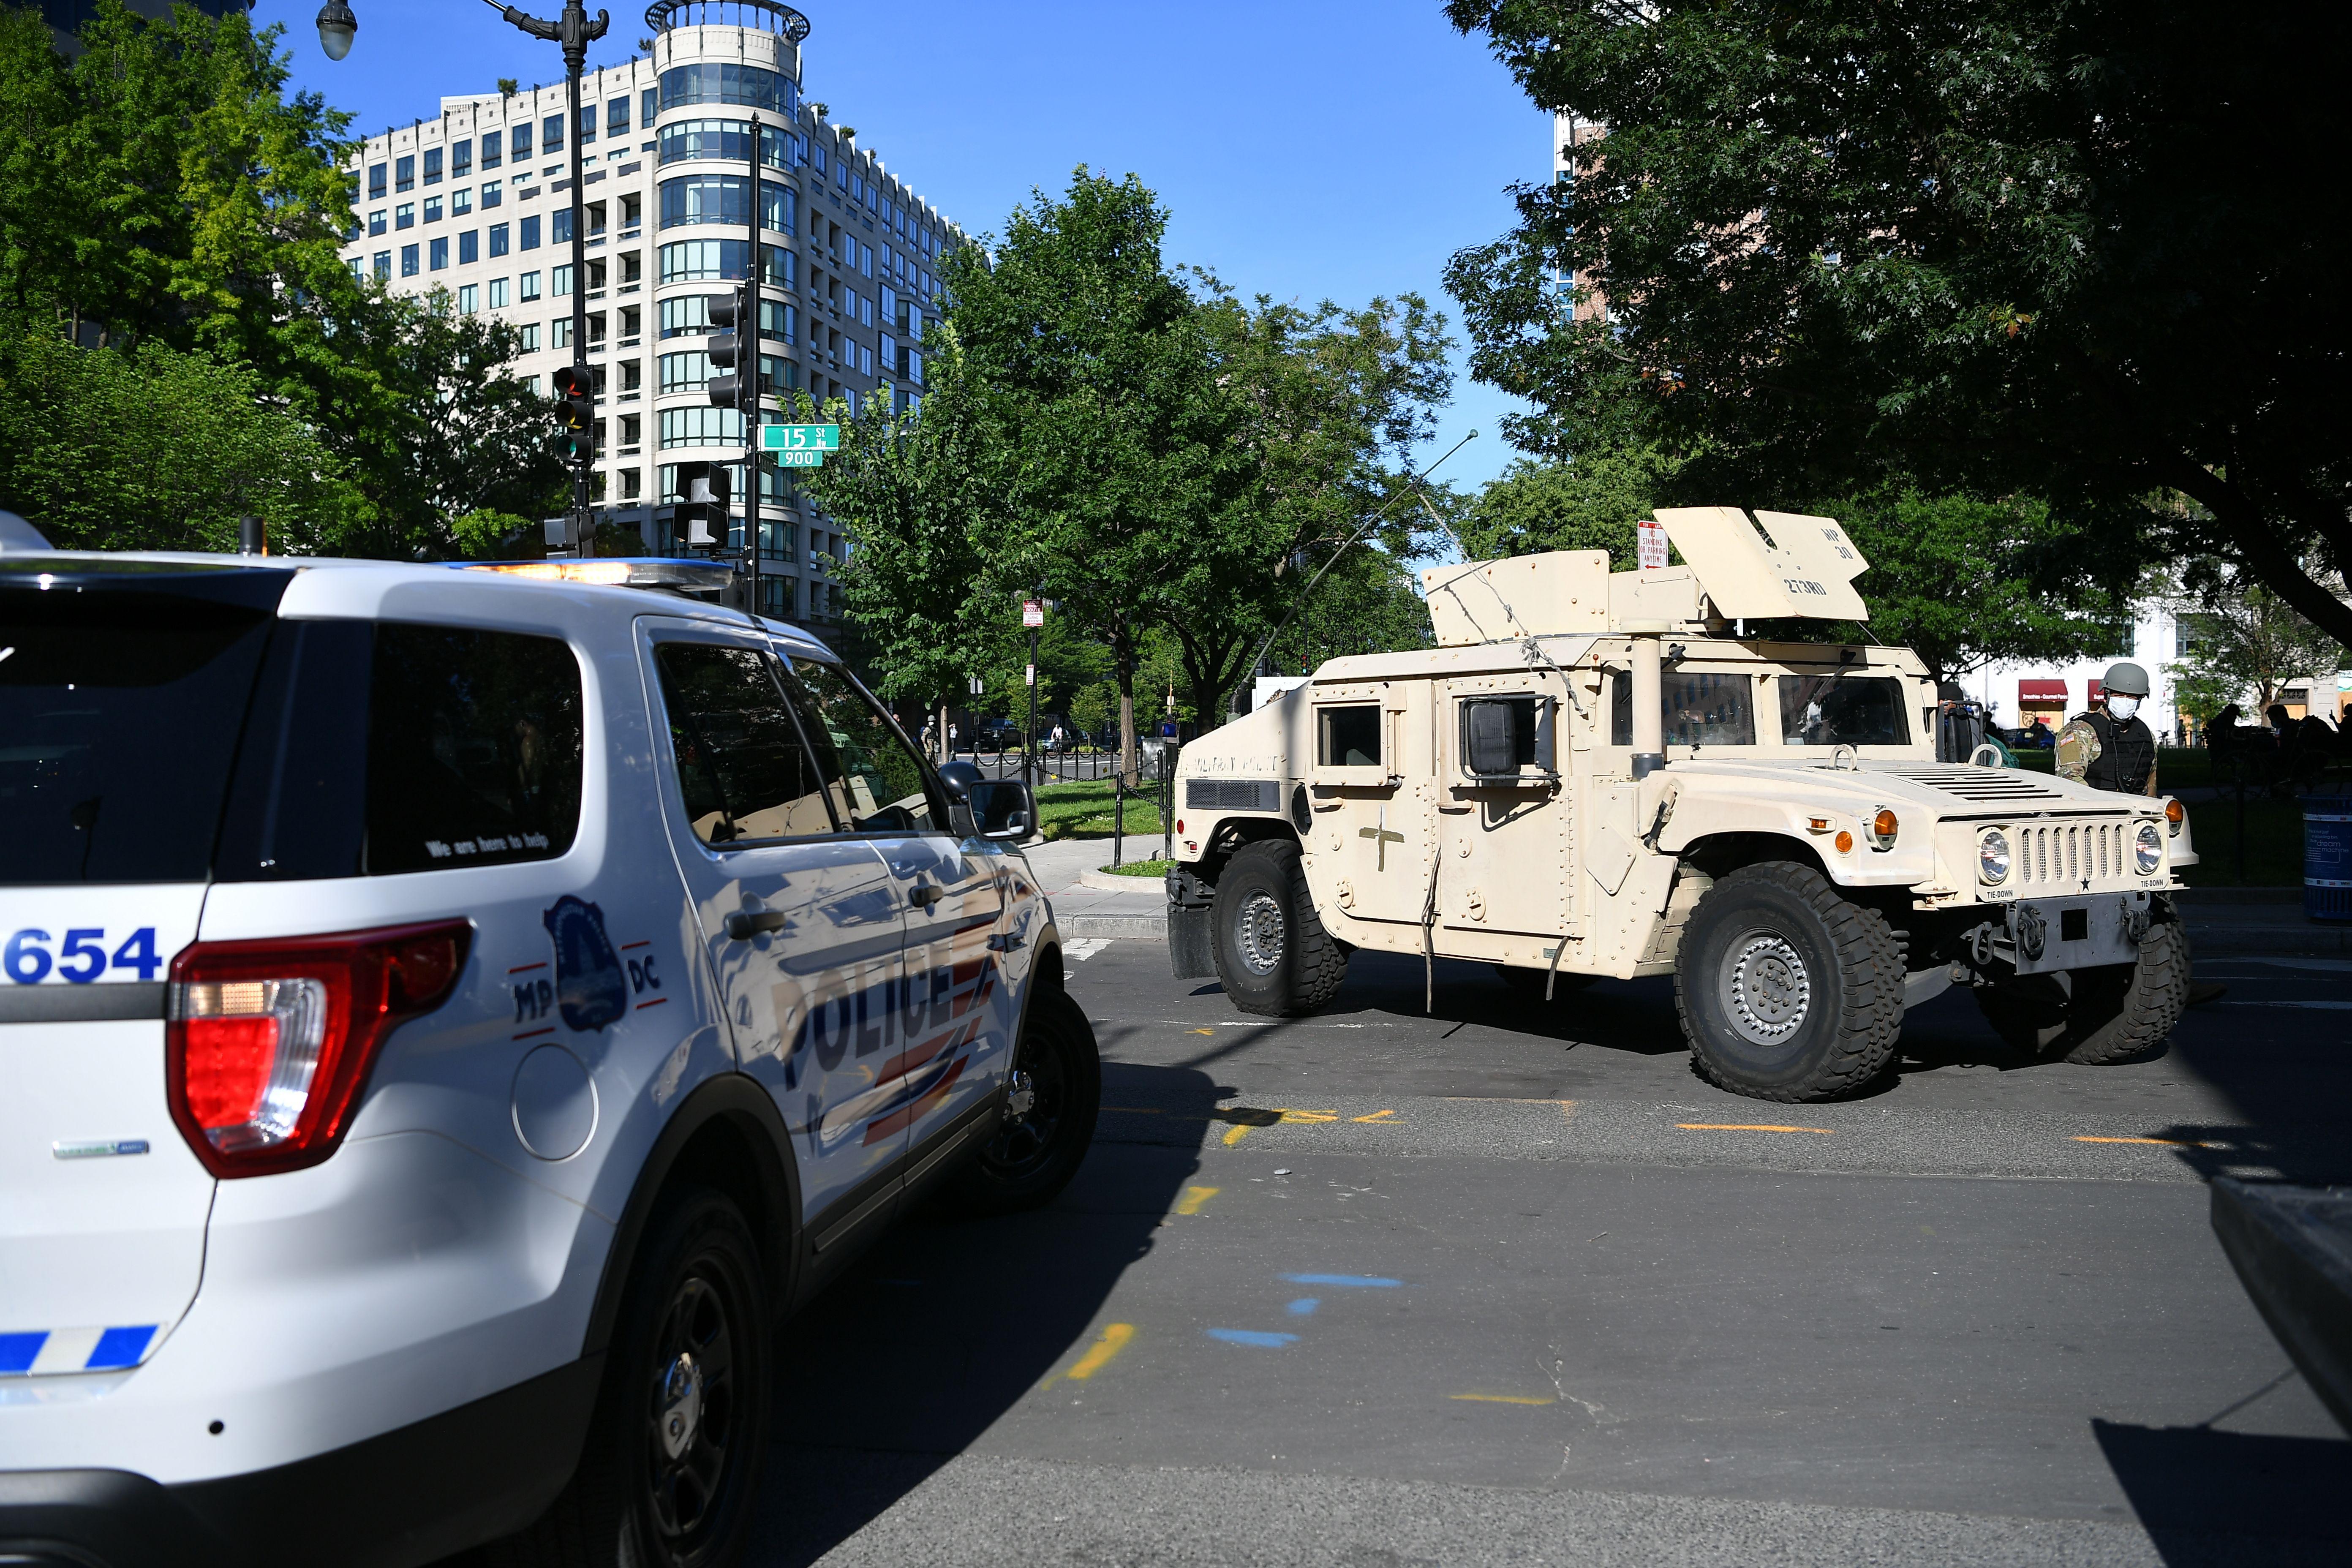 A tank and a police van block a road.